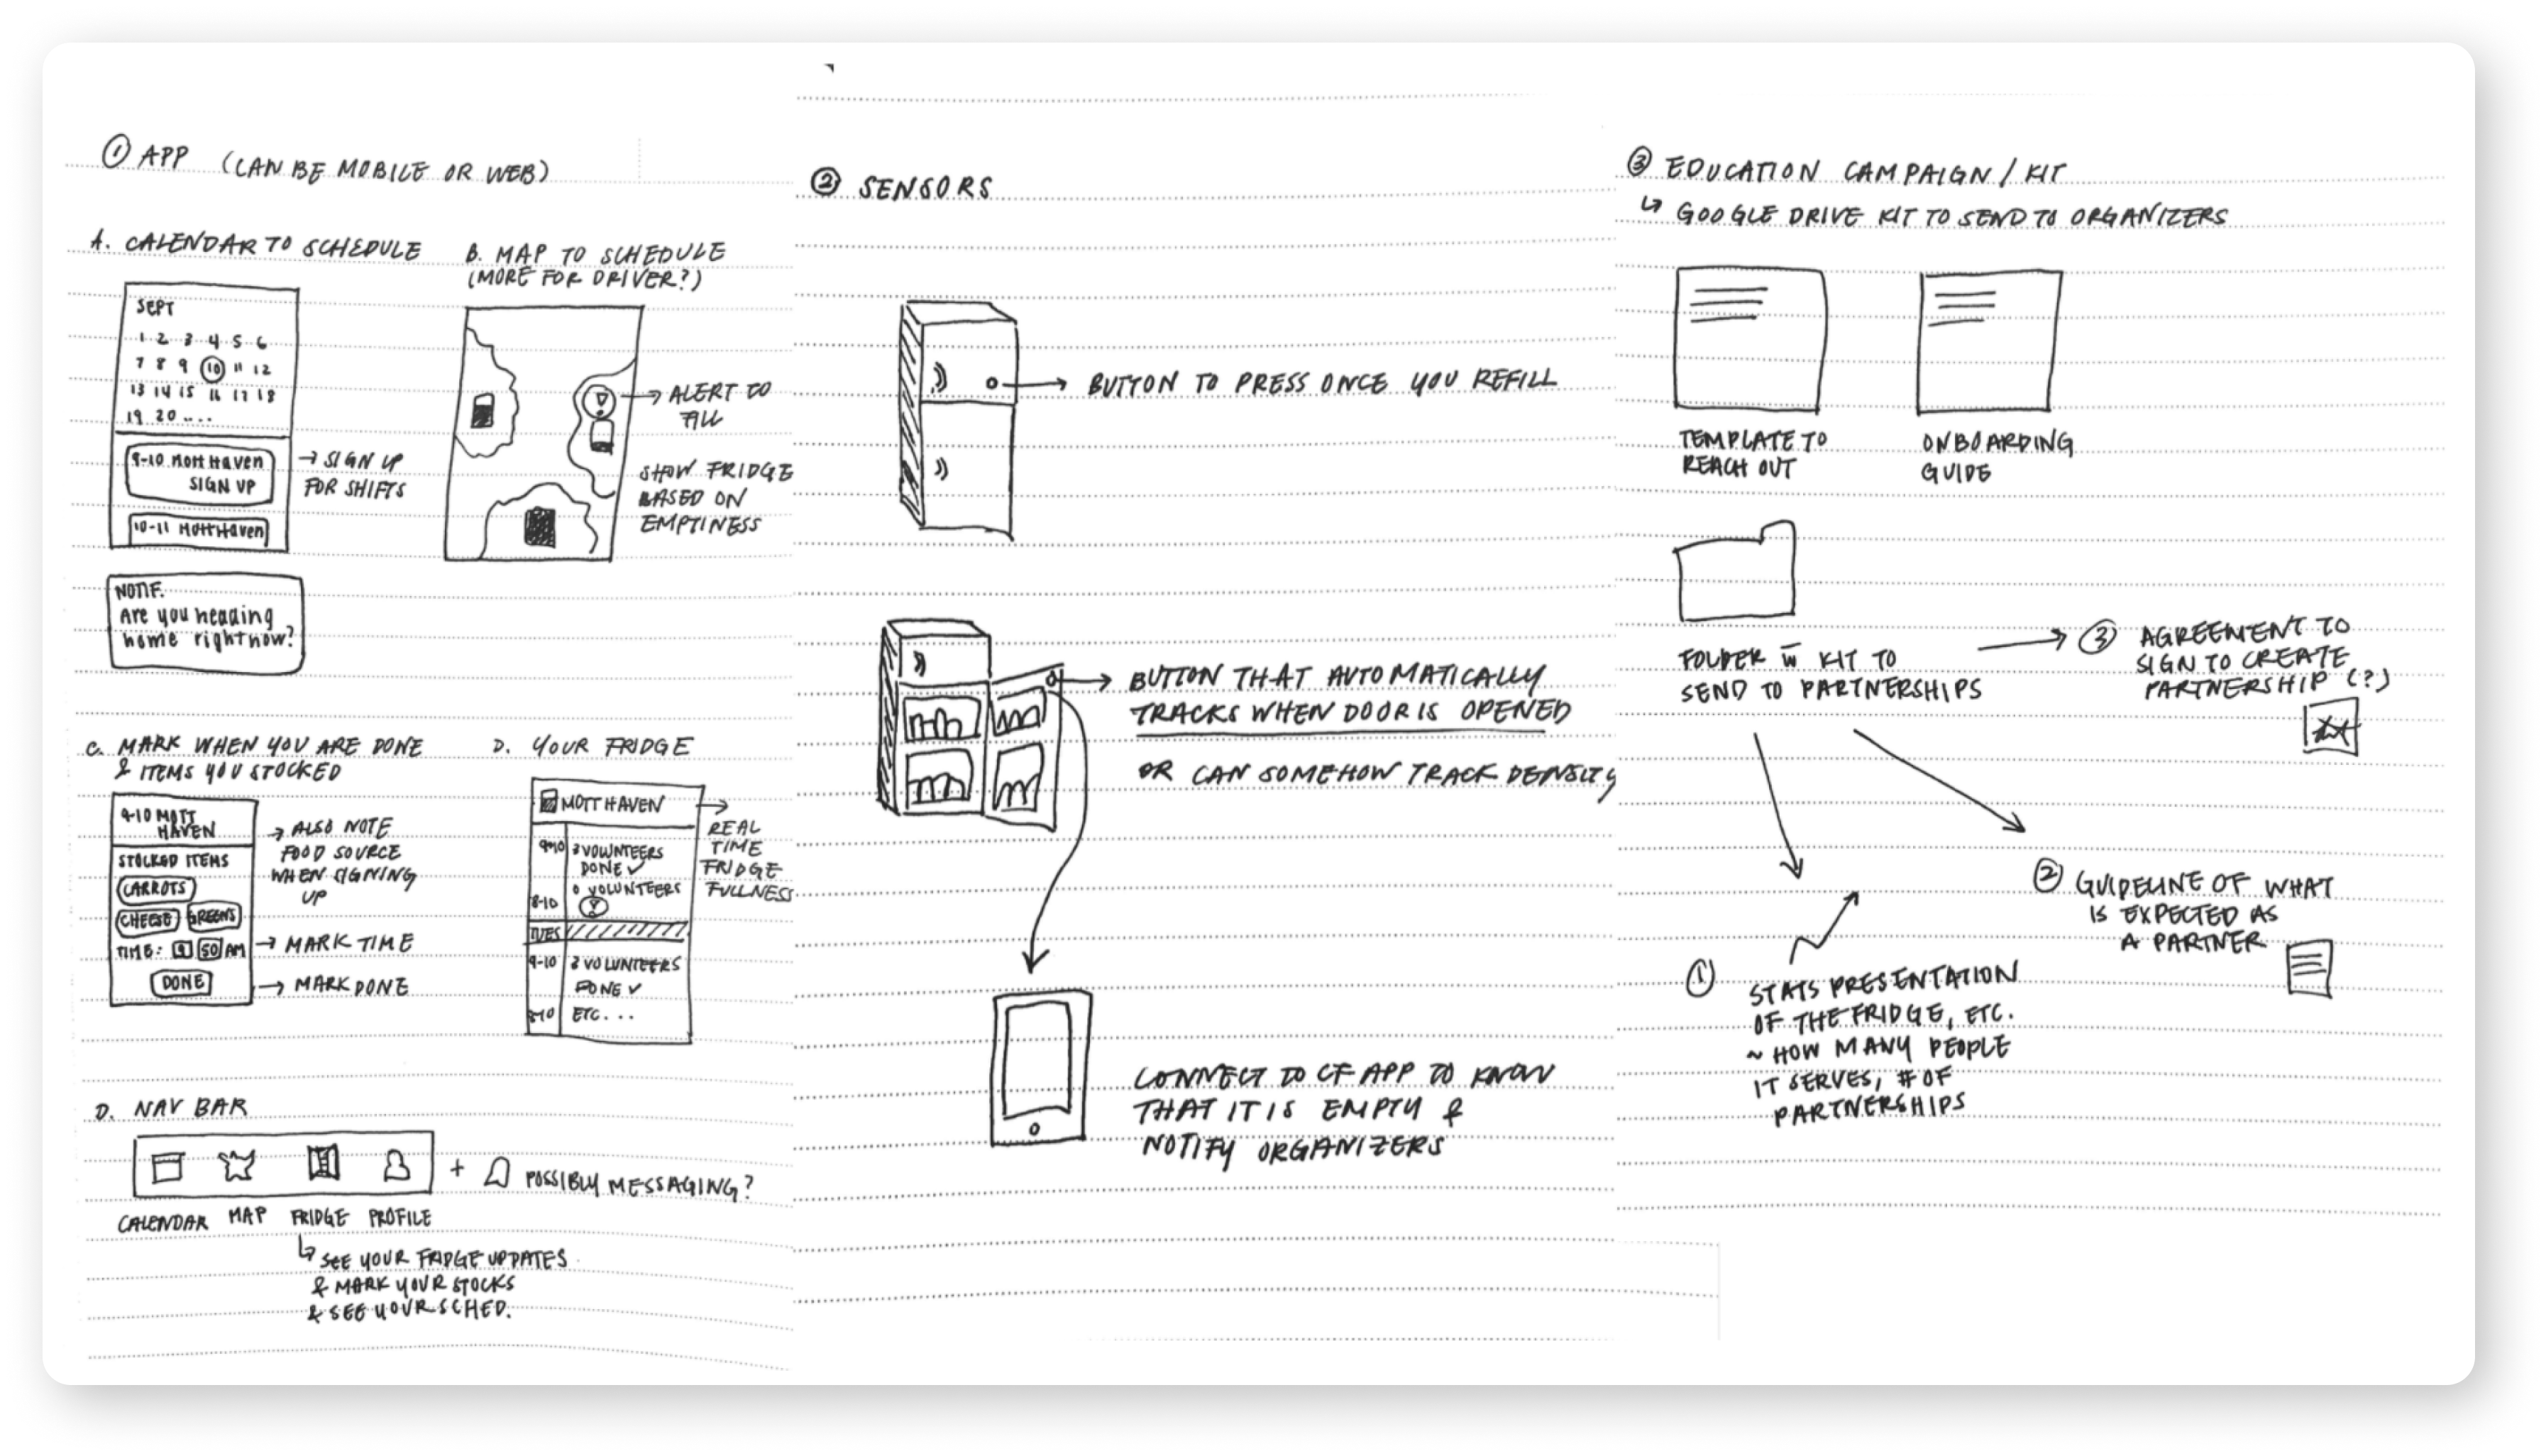 Low Fidelity Prototype: Initial Sketches on paper